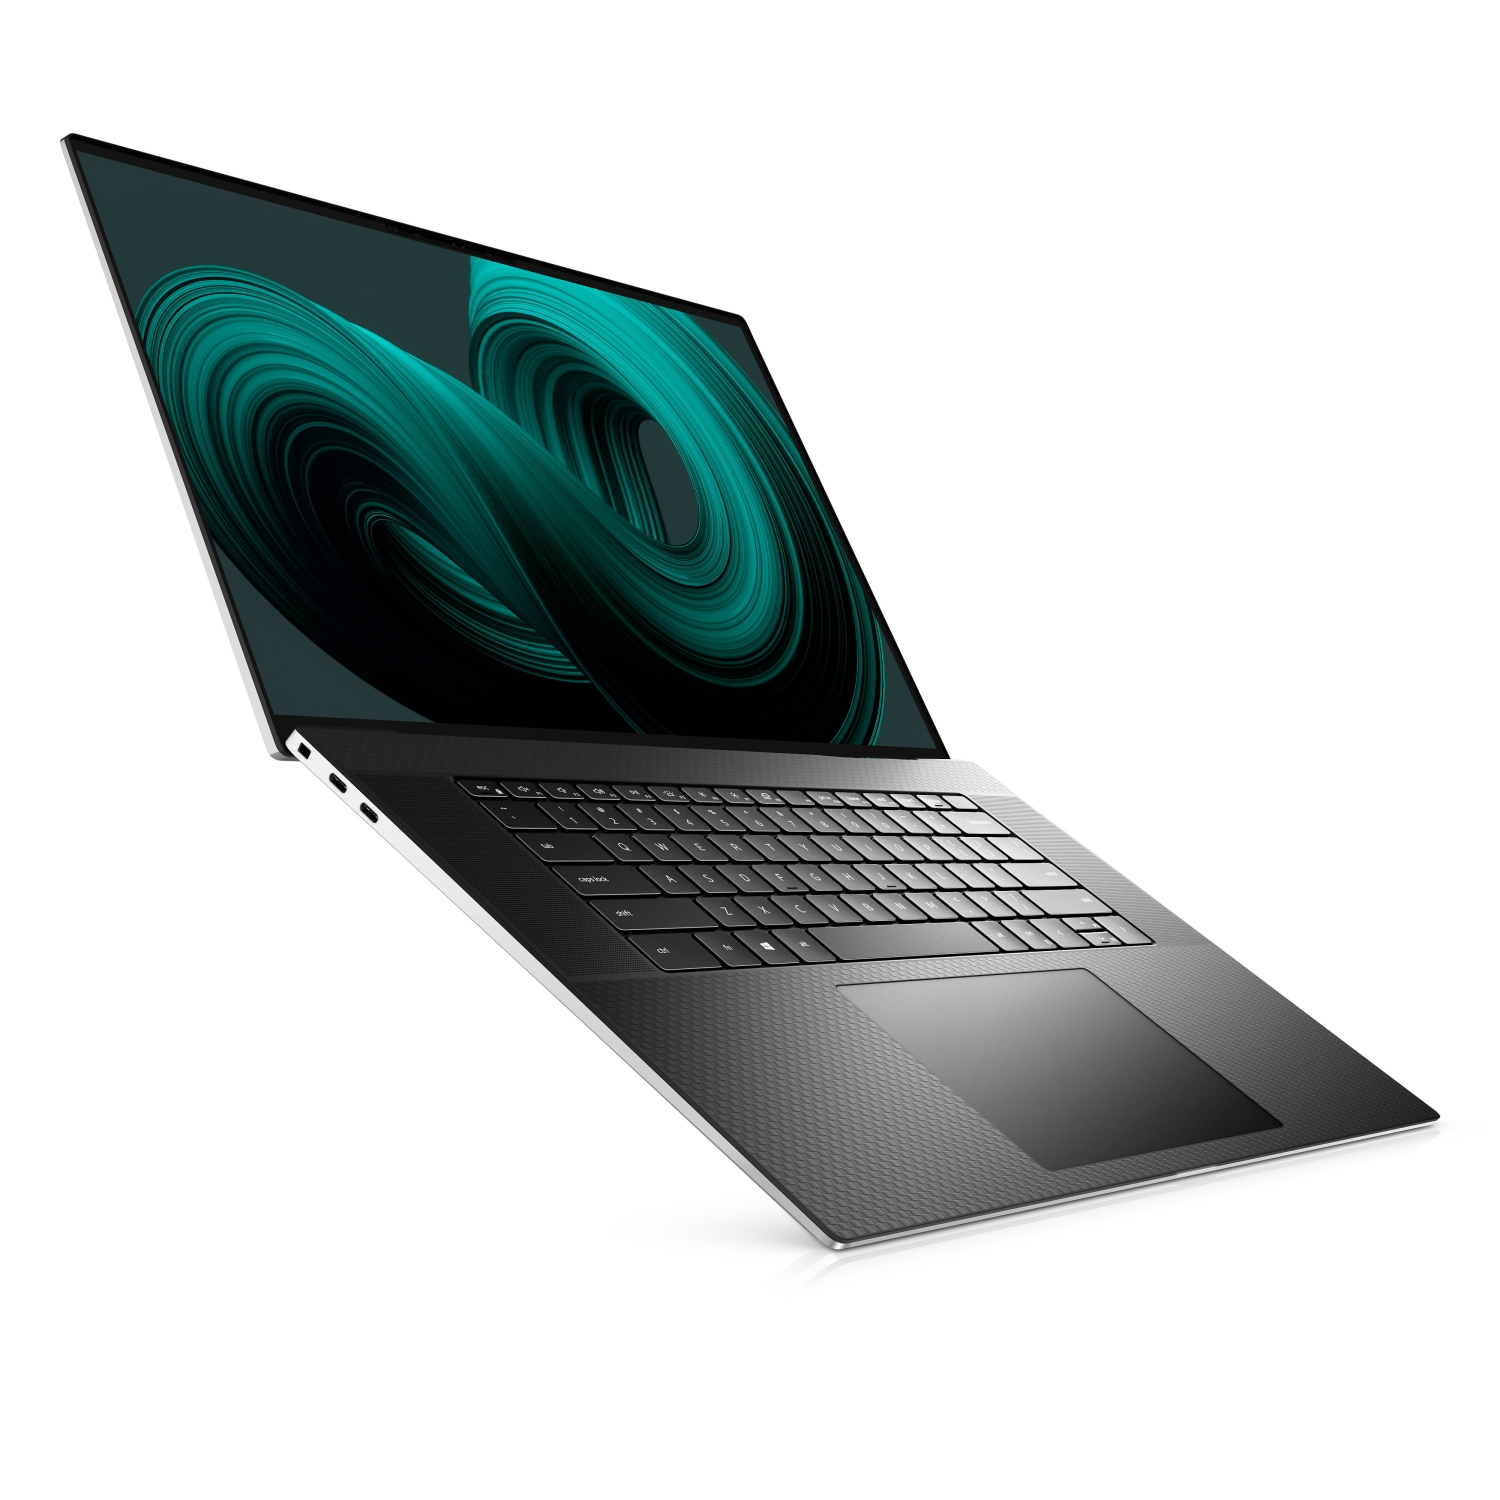 Refurbished (Excellent) - Dell XPS 17 9710 Laptop (2021) | 17" 4K Touch | Core i9 - 2TB SSD - 32GB RAM - RTX 3060 | 8 Cores @ 4.9 GHz - 11th Gen CPU Certified Refurbished